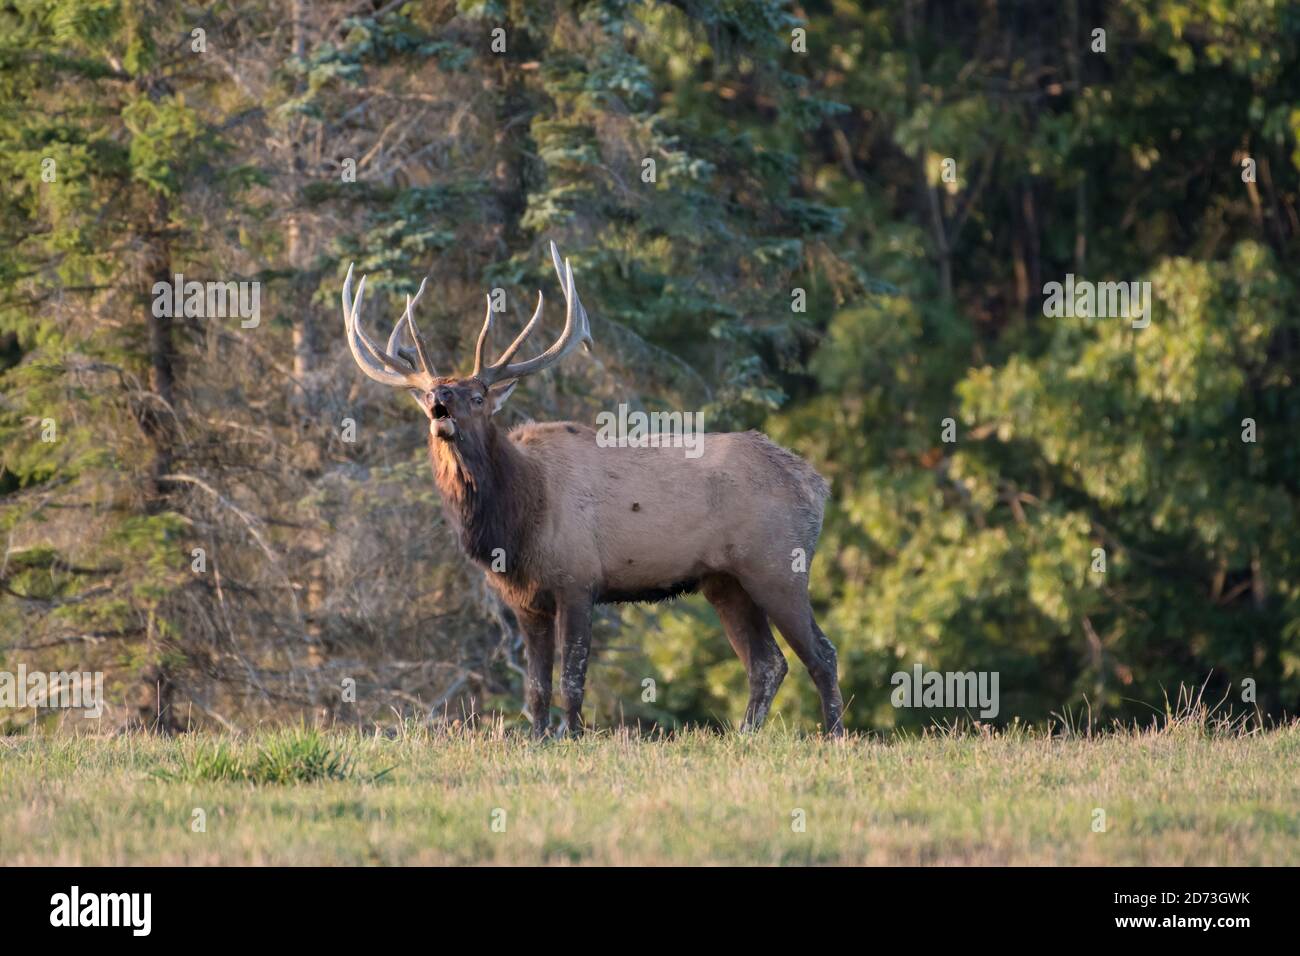 A bull elk bugling in a field during the elk rut  in Benzette, Pennsylvania, USA Stock Photo